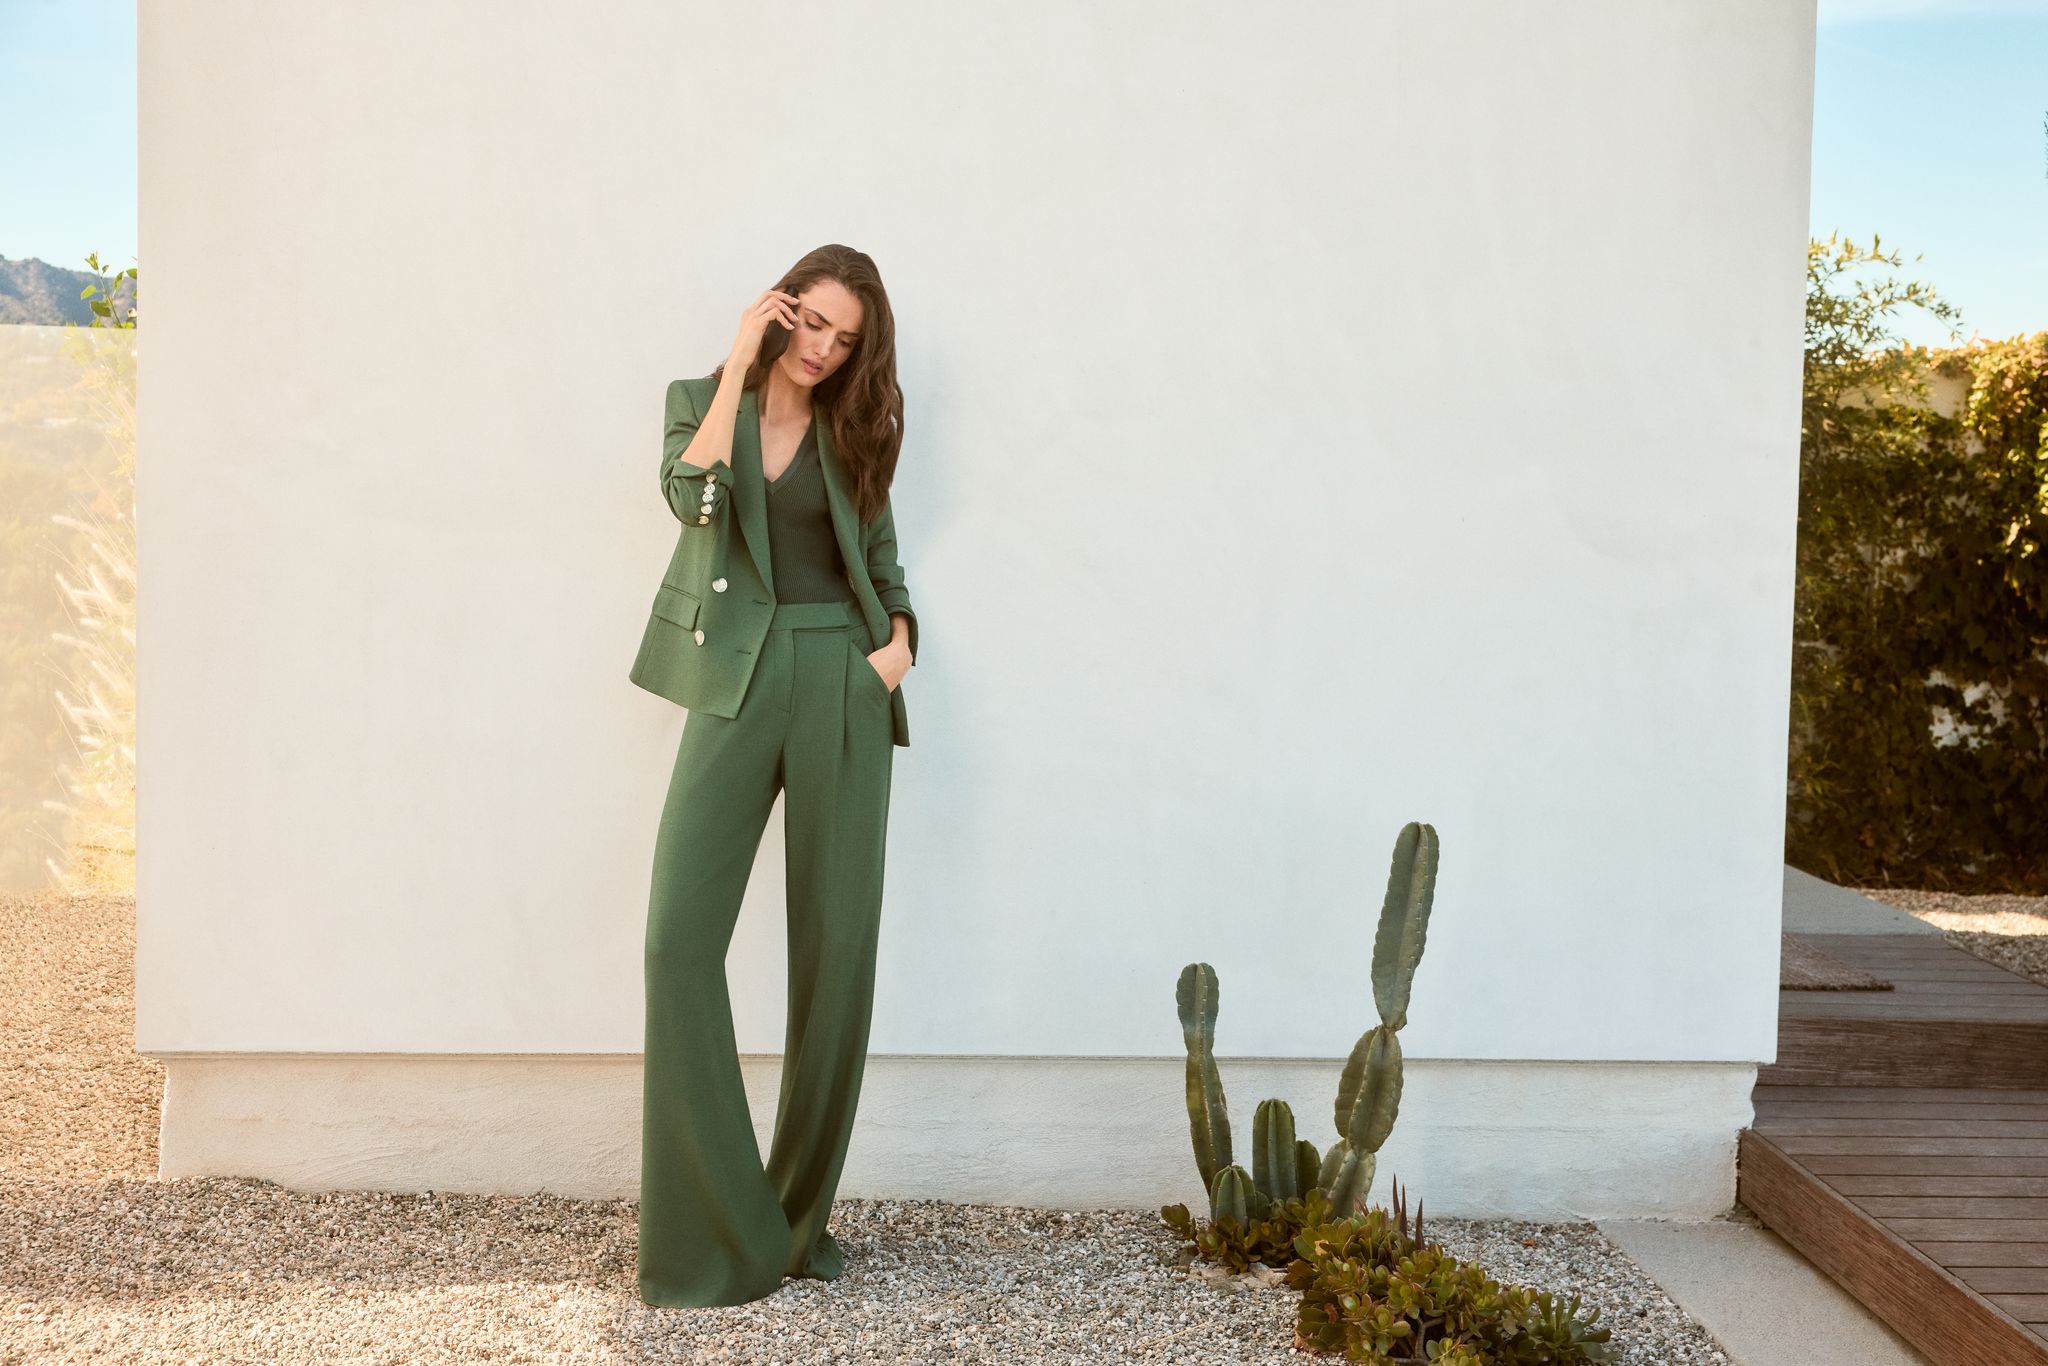 Woman in a green pantsuit standing in front of a wall, next to a cactus